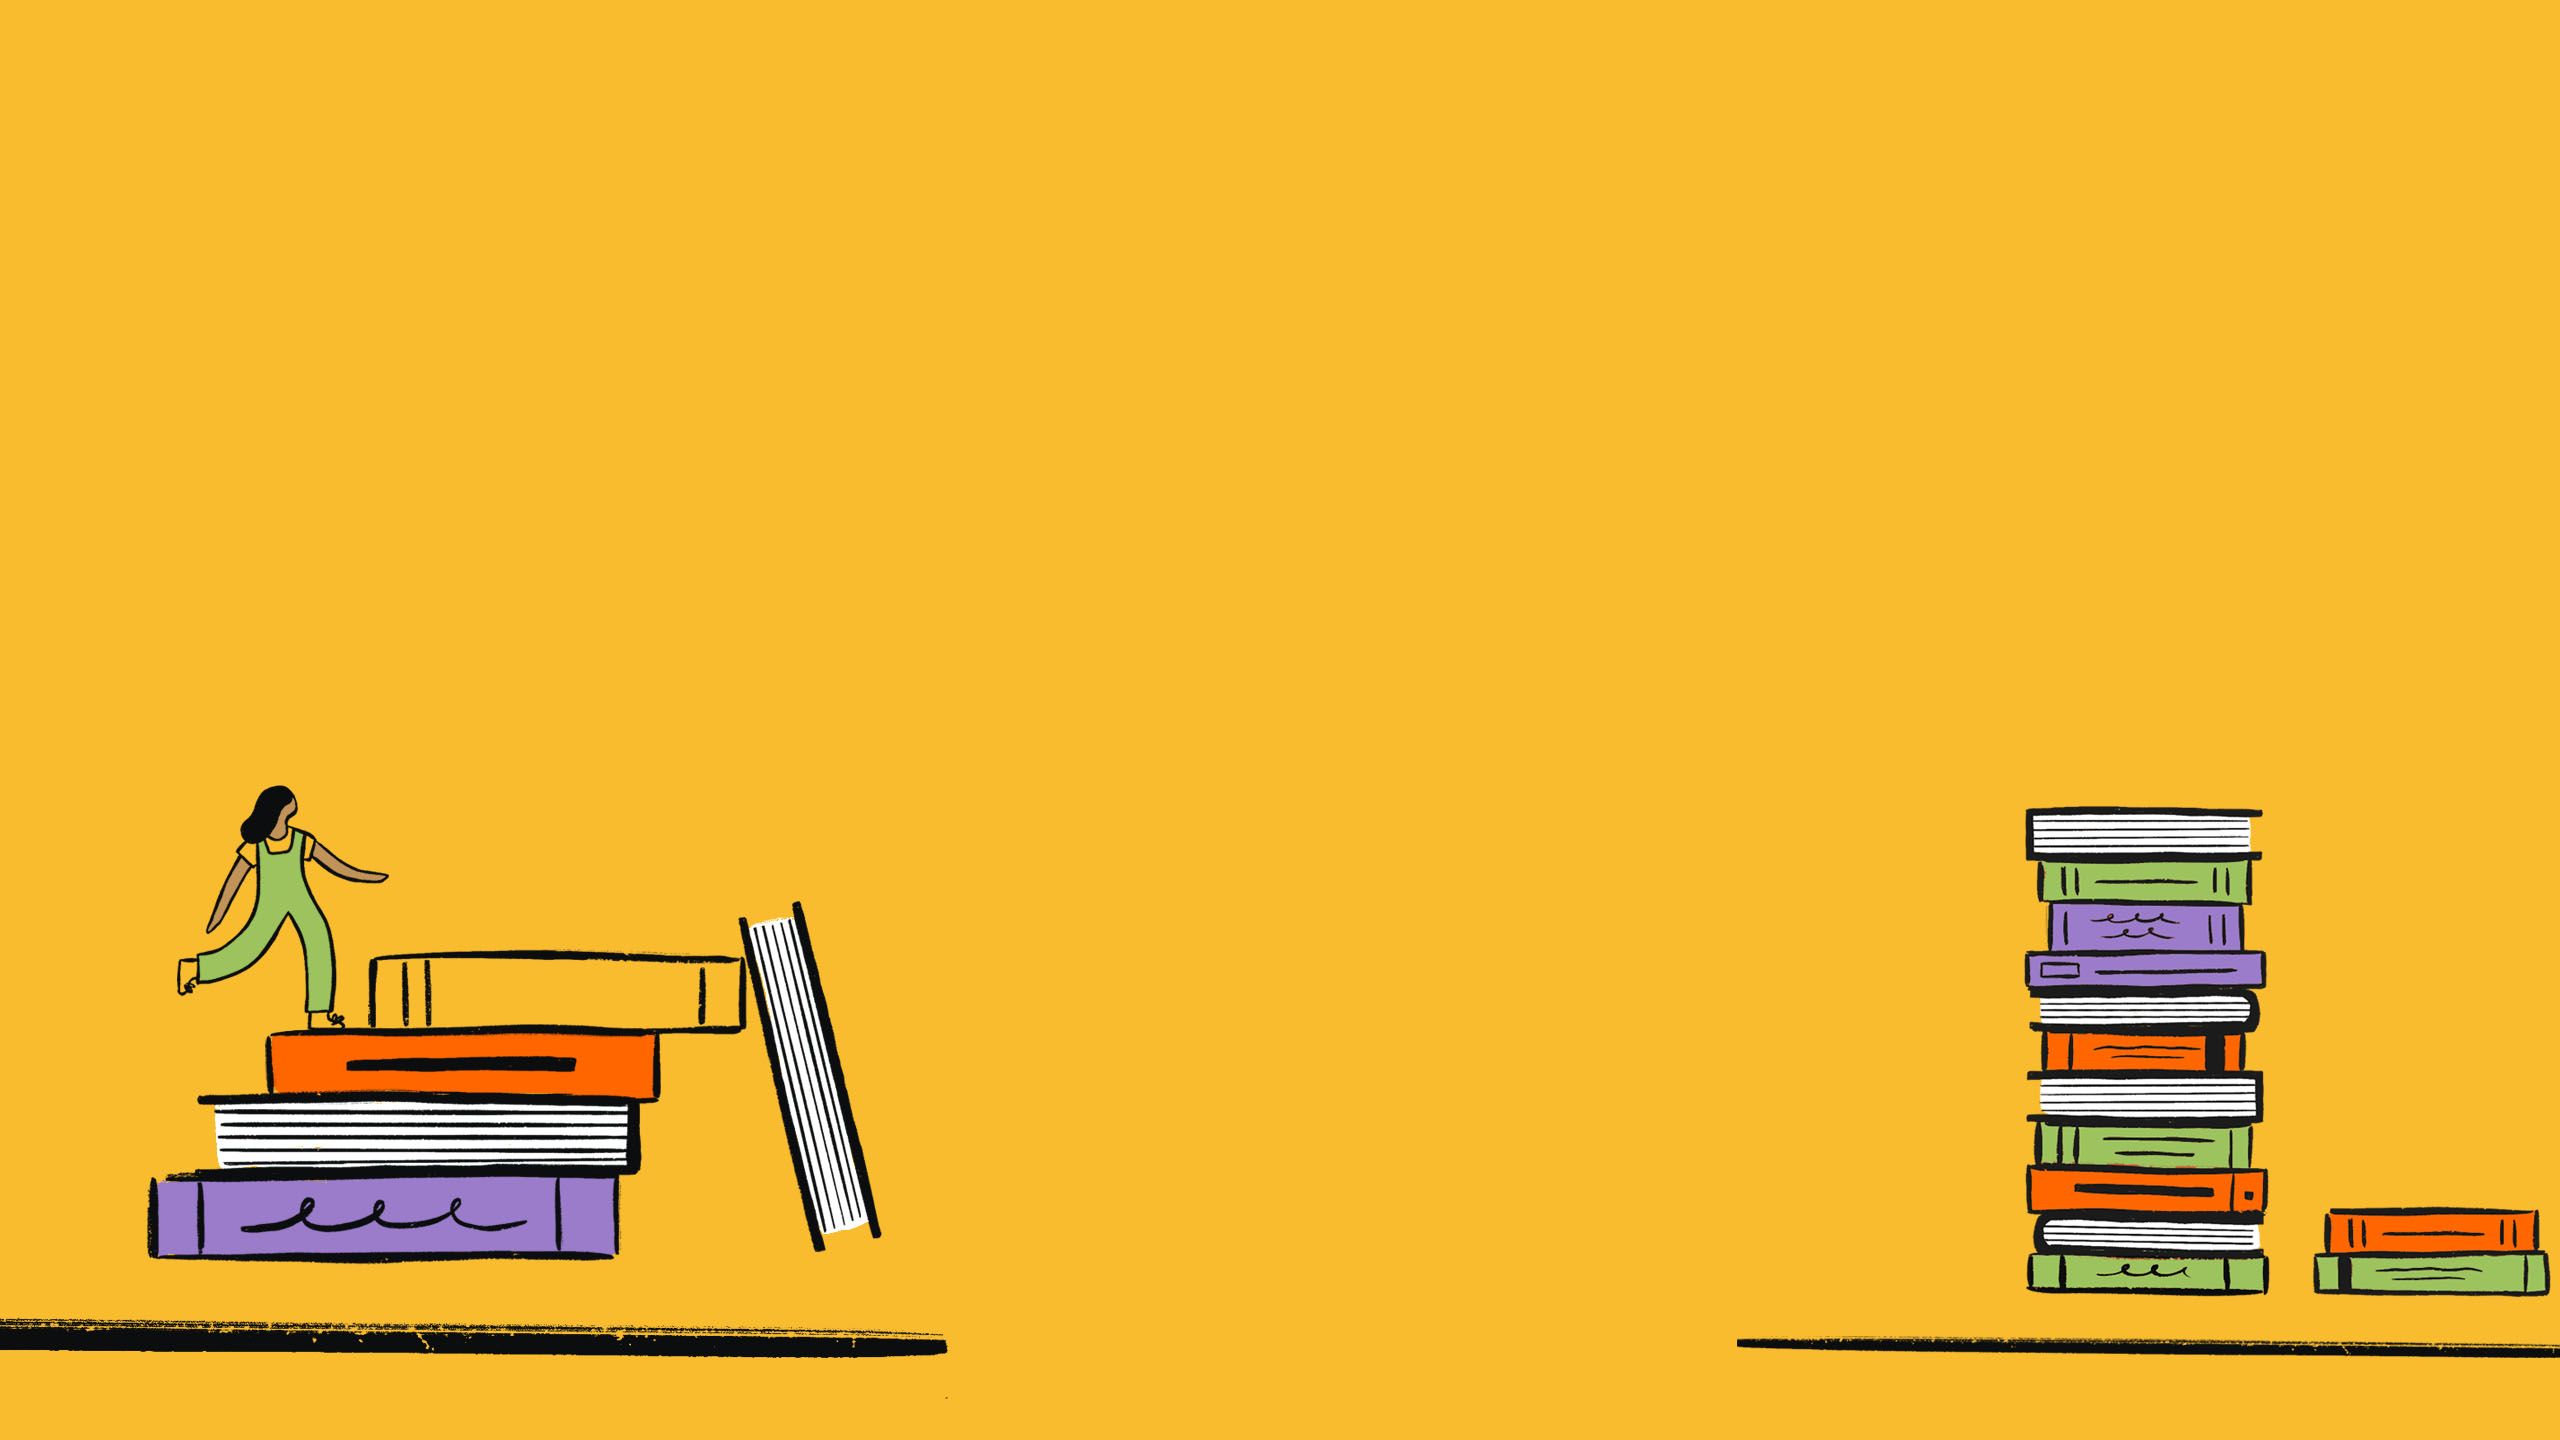 Illustration of girl climbing up a stack of coloured books like stairs.